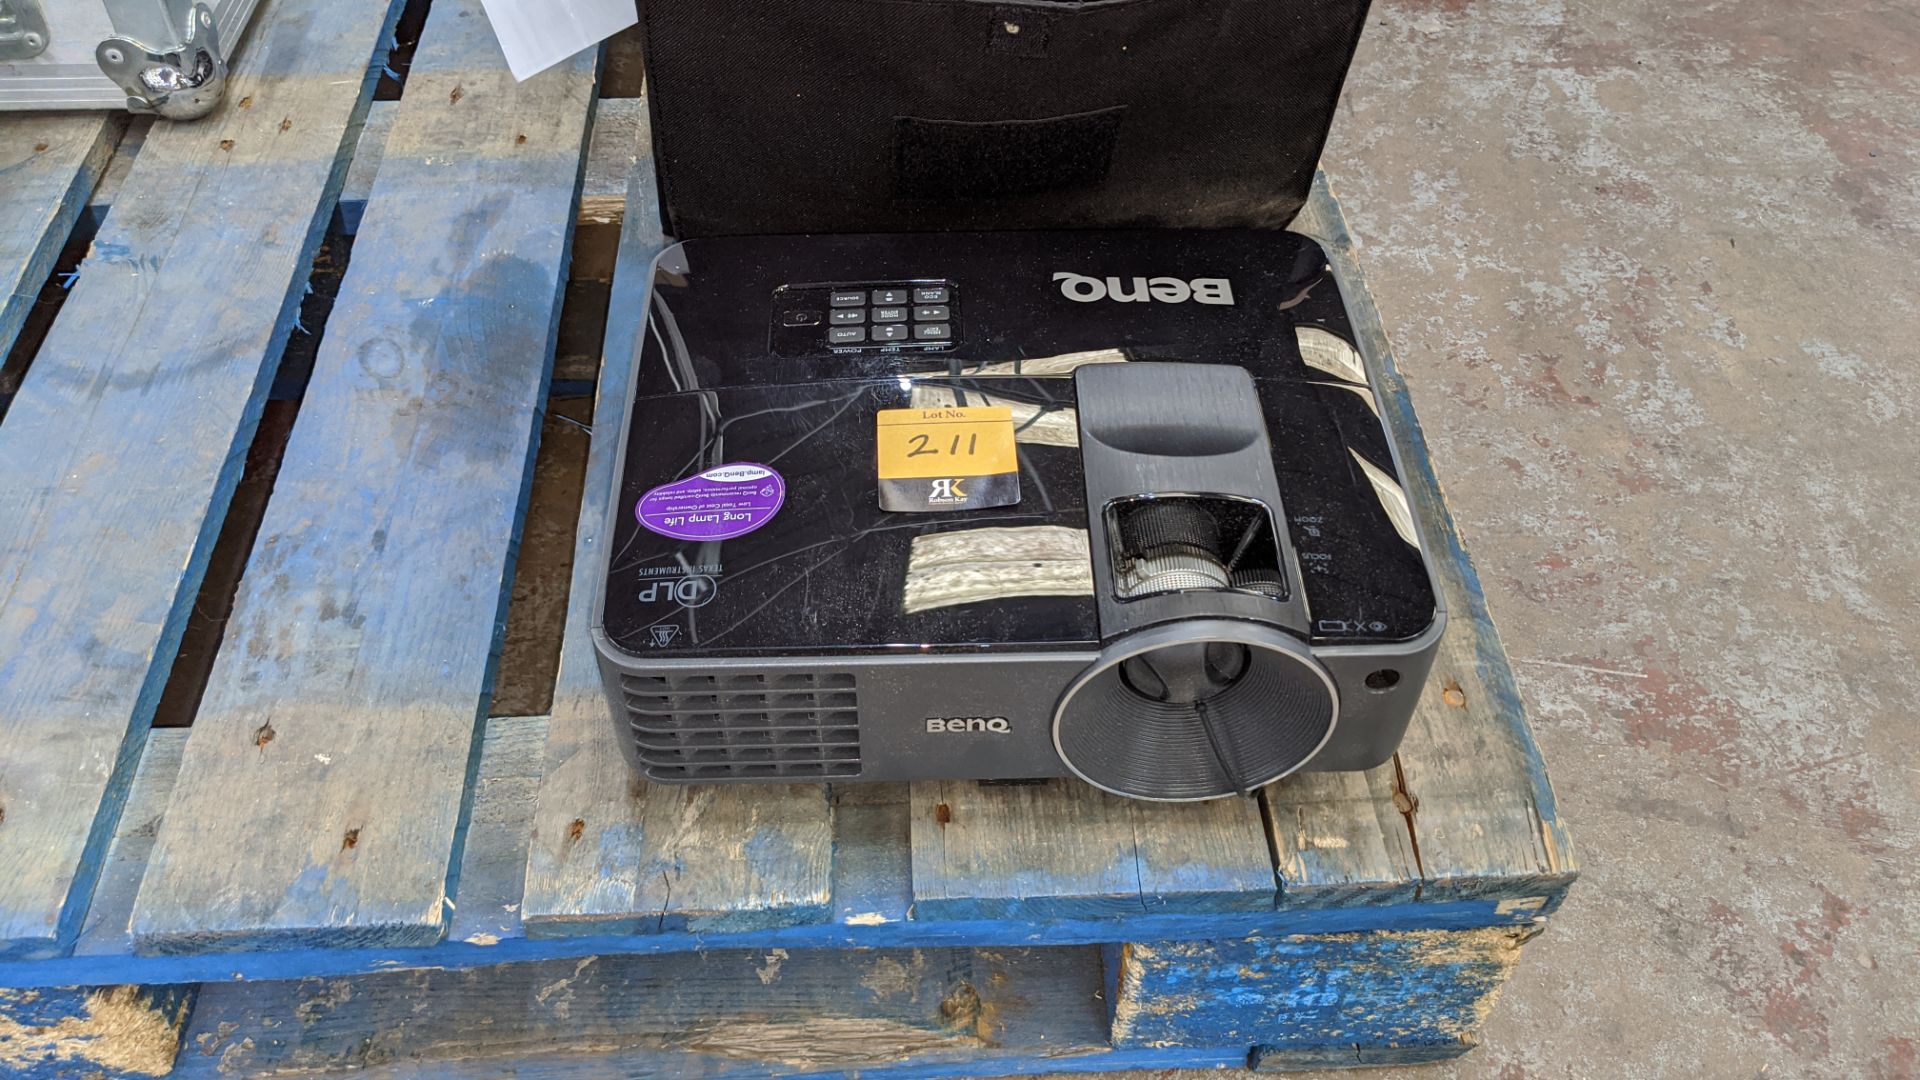 Benq model MS502 projector, with carry case & remote